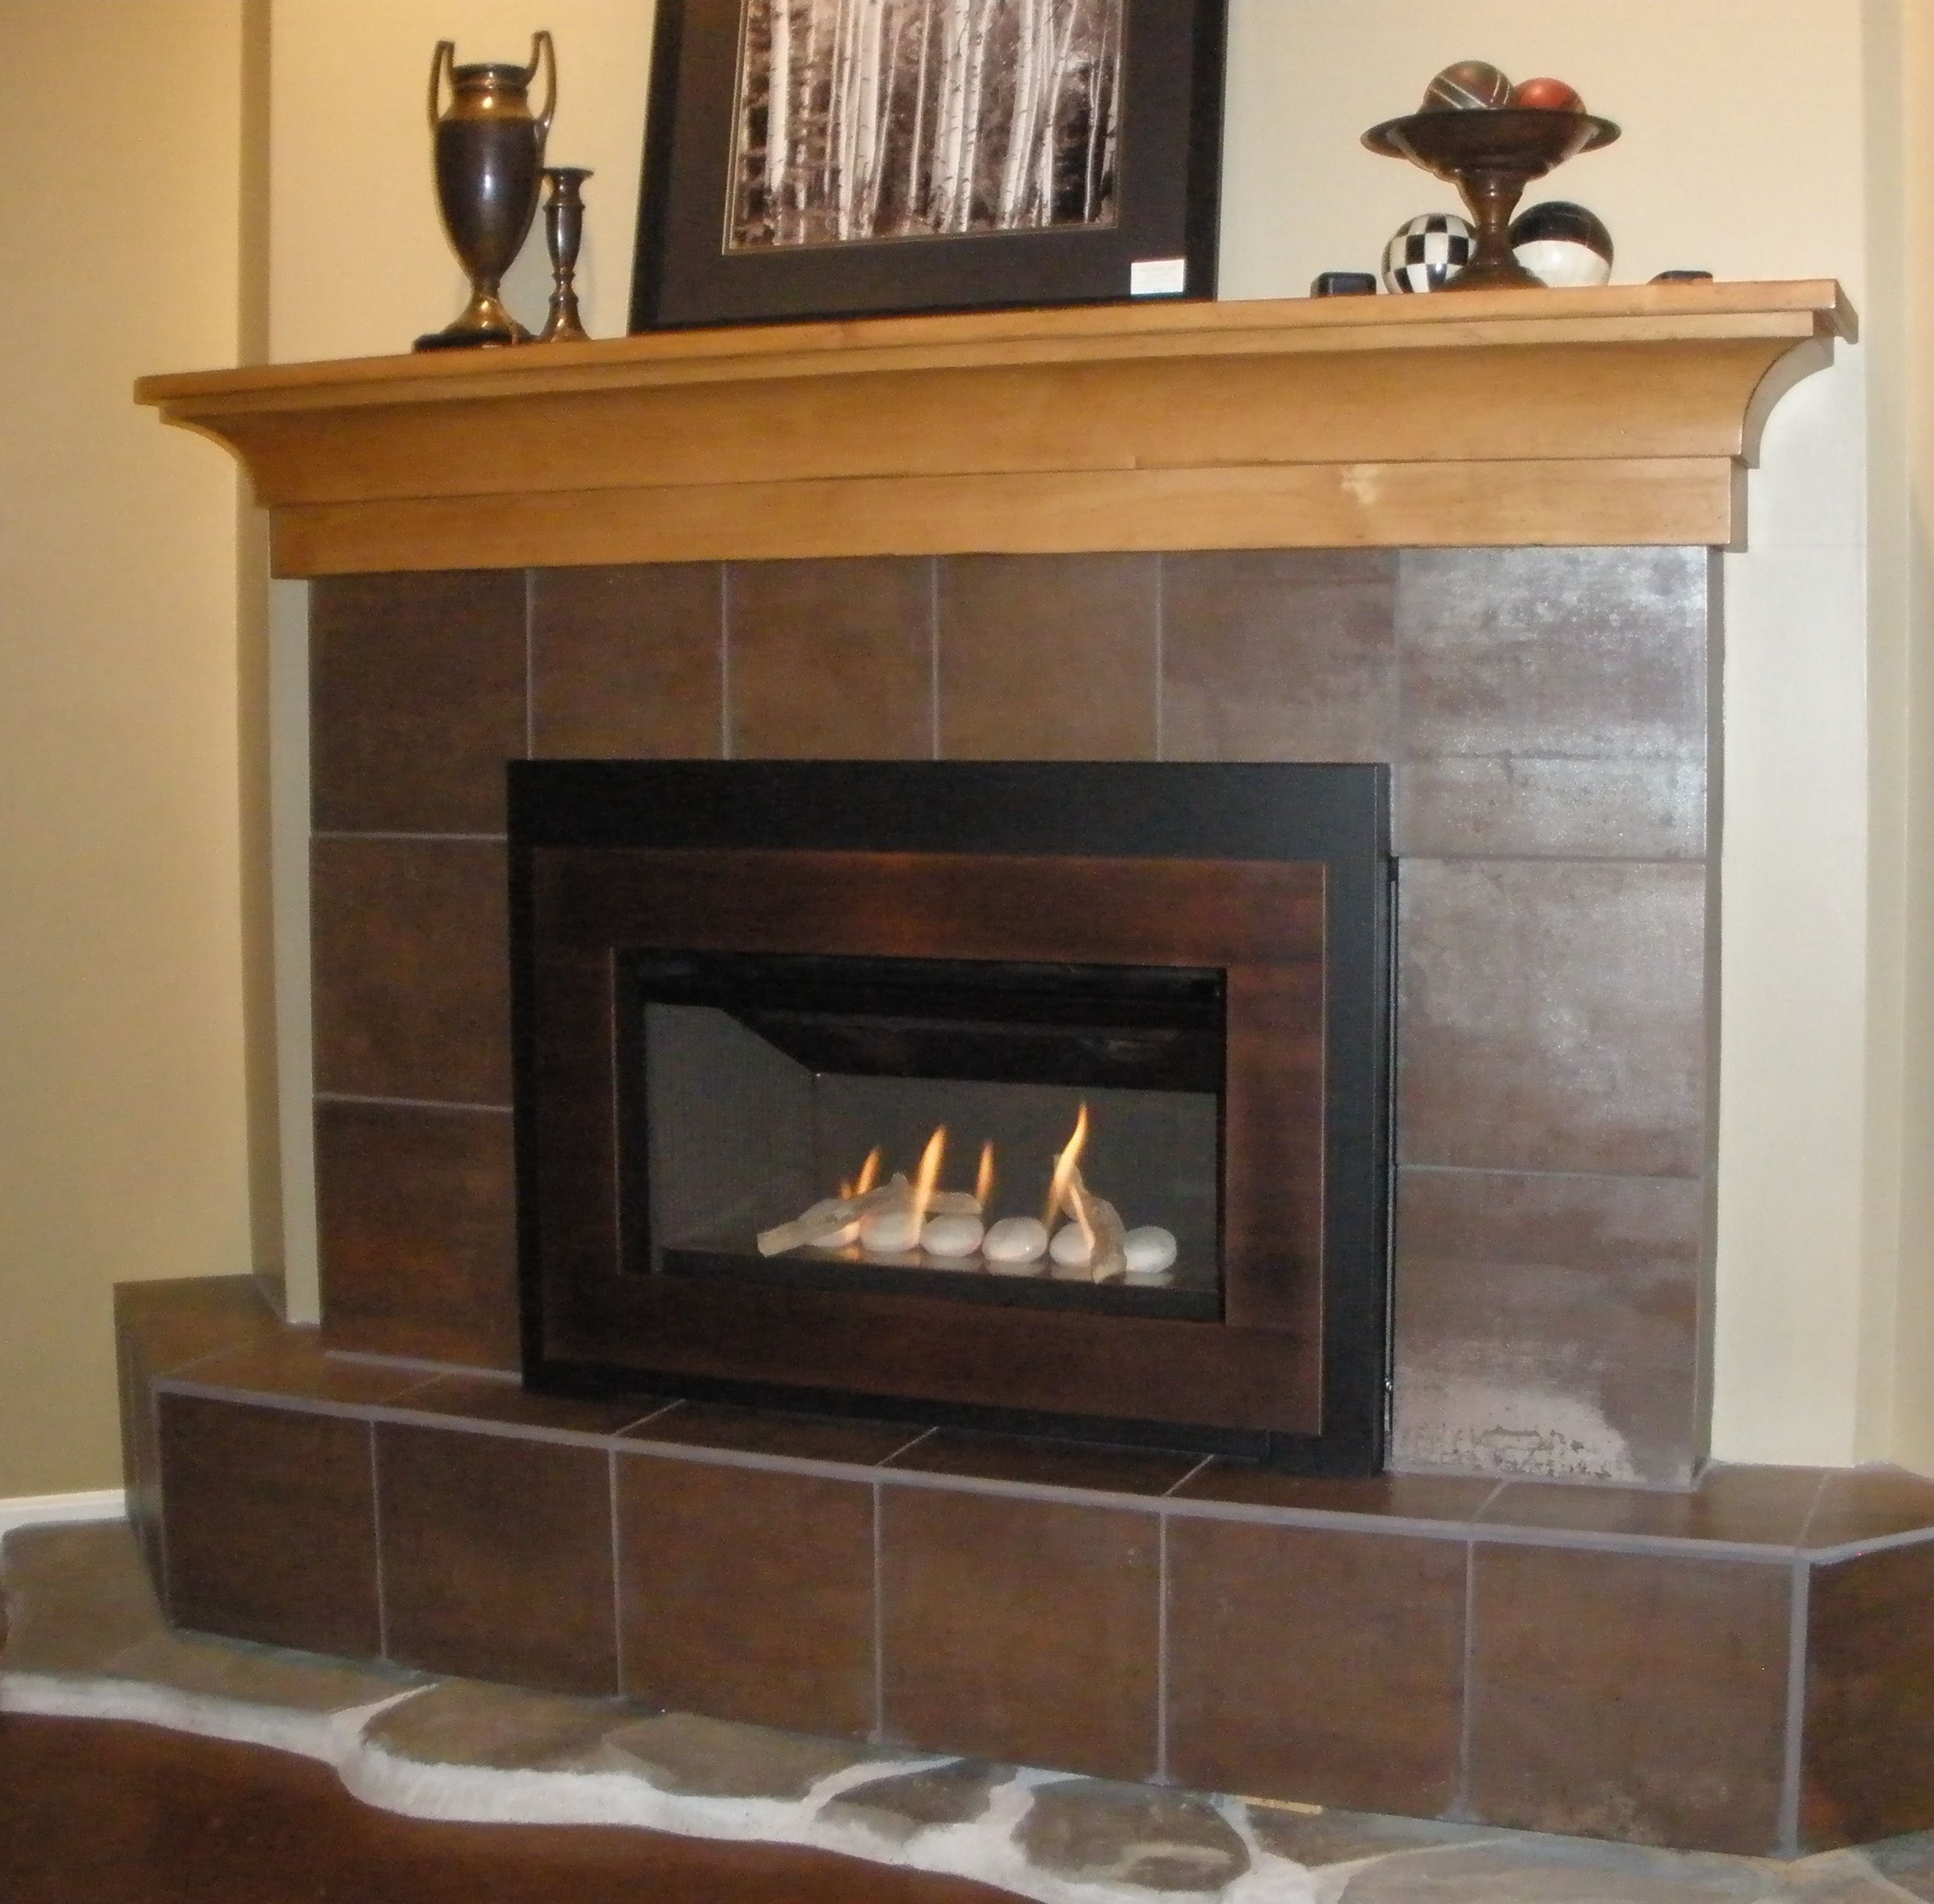 Direct Vent Gas Fireplace Home Depot Awesome Pin On Valor Radiant Gas Fireplaces Midwest Dealer